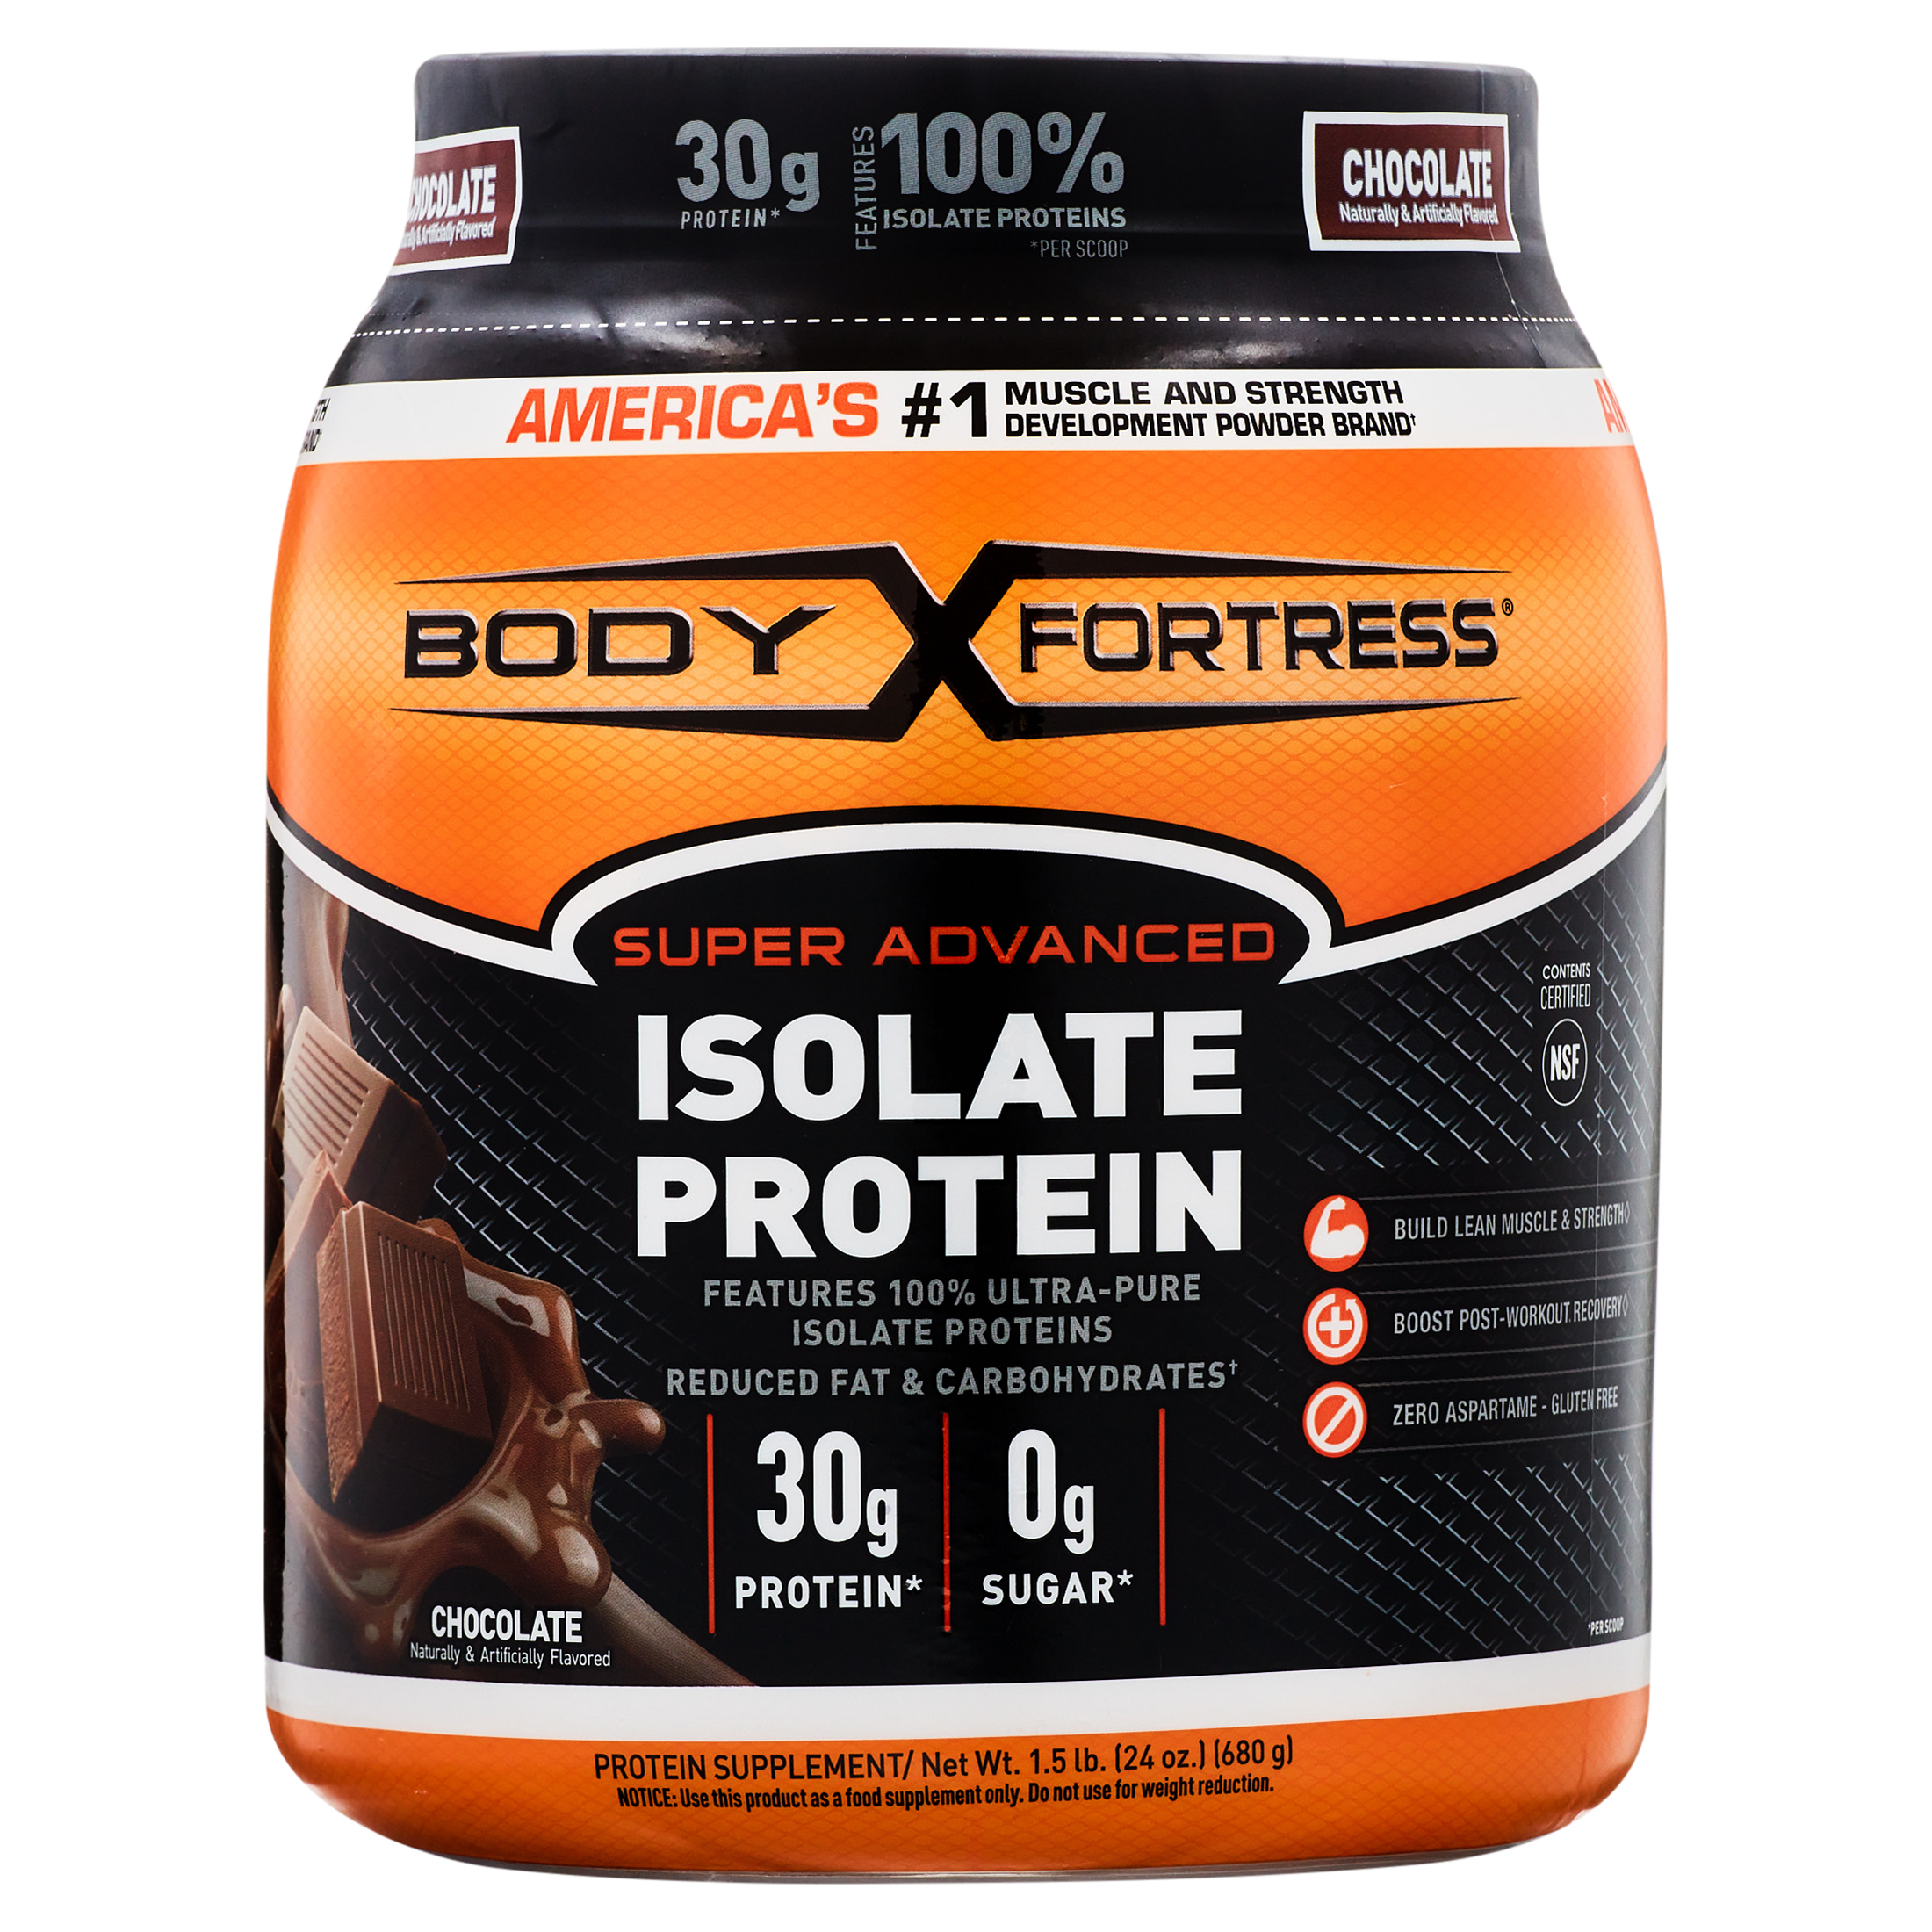 Body Fortress Isolate Powder, 30g Protein per scoop, Chocolate, 1.5 lbs (Packaging May Vary) - image 1 of 6